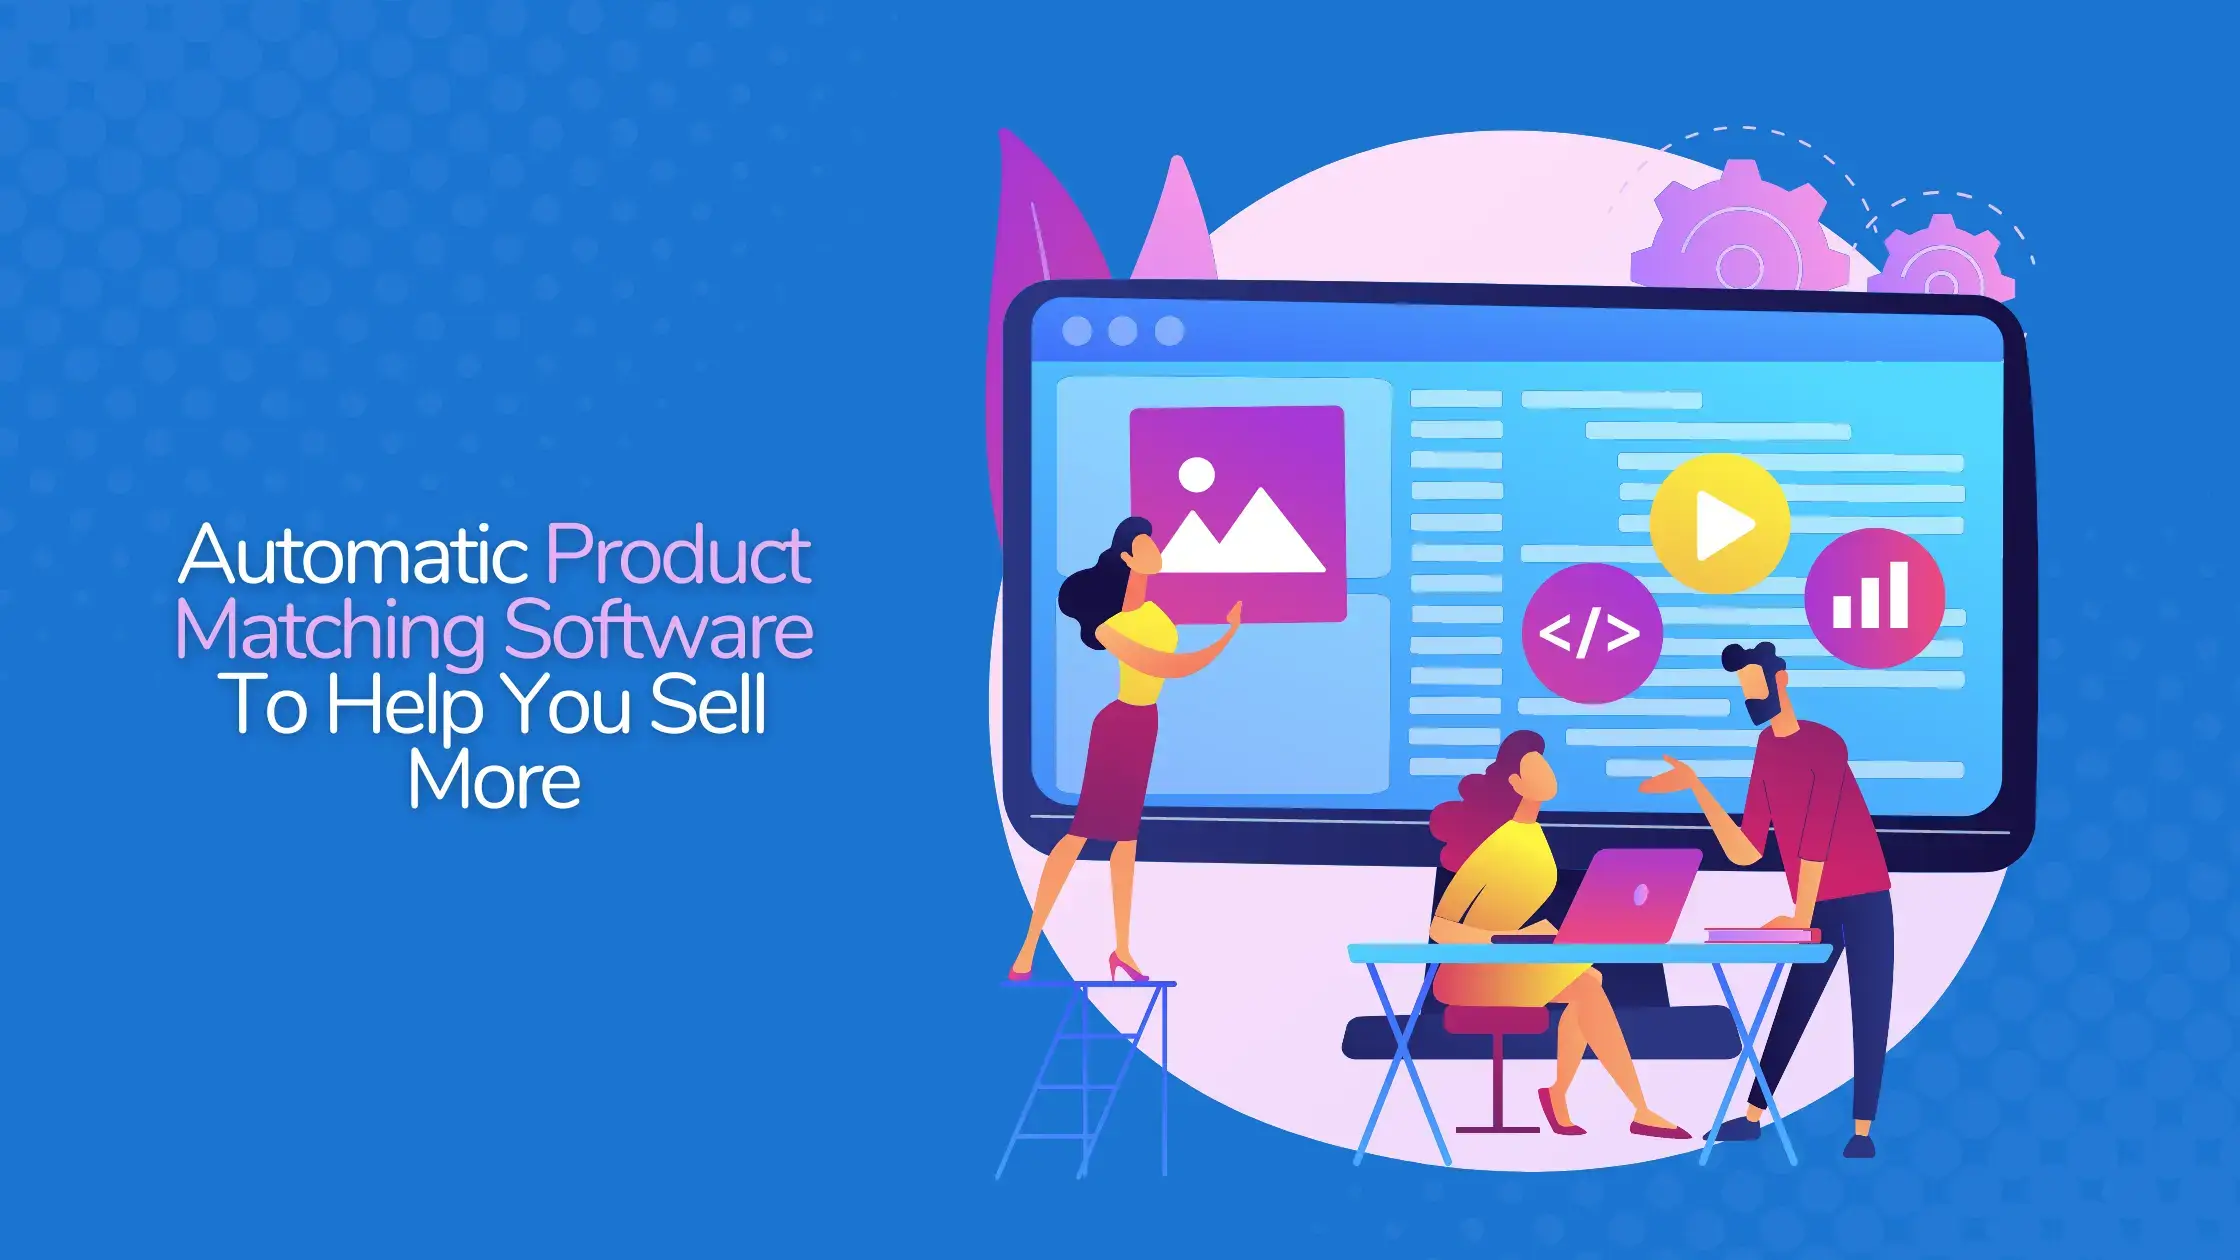 Automatic-Product-Matching-Software-To-Help-You-Sell-More-1